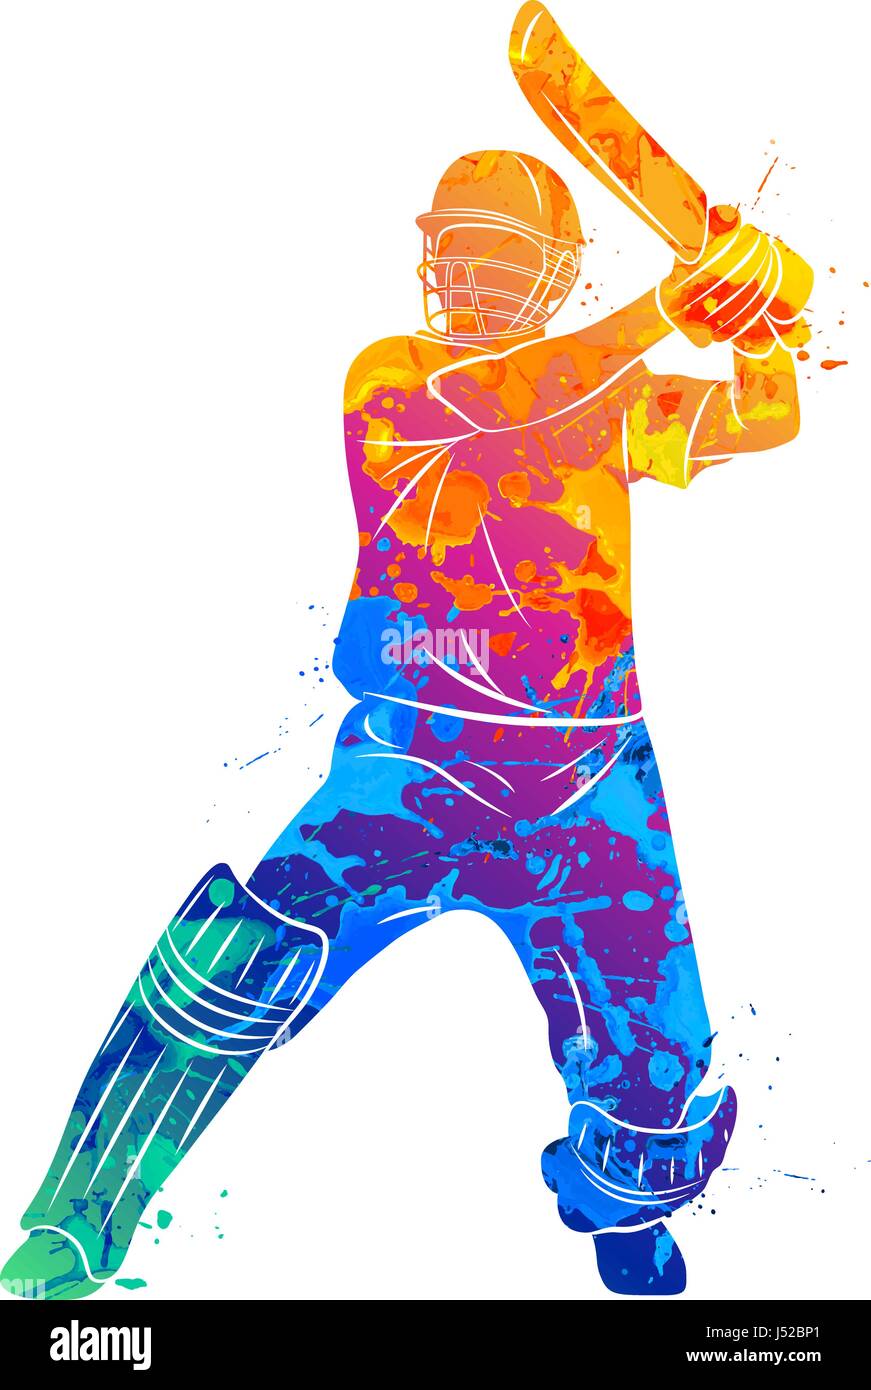 Cricket poster Stock Vector Images - Alamy